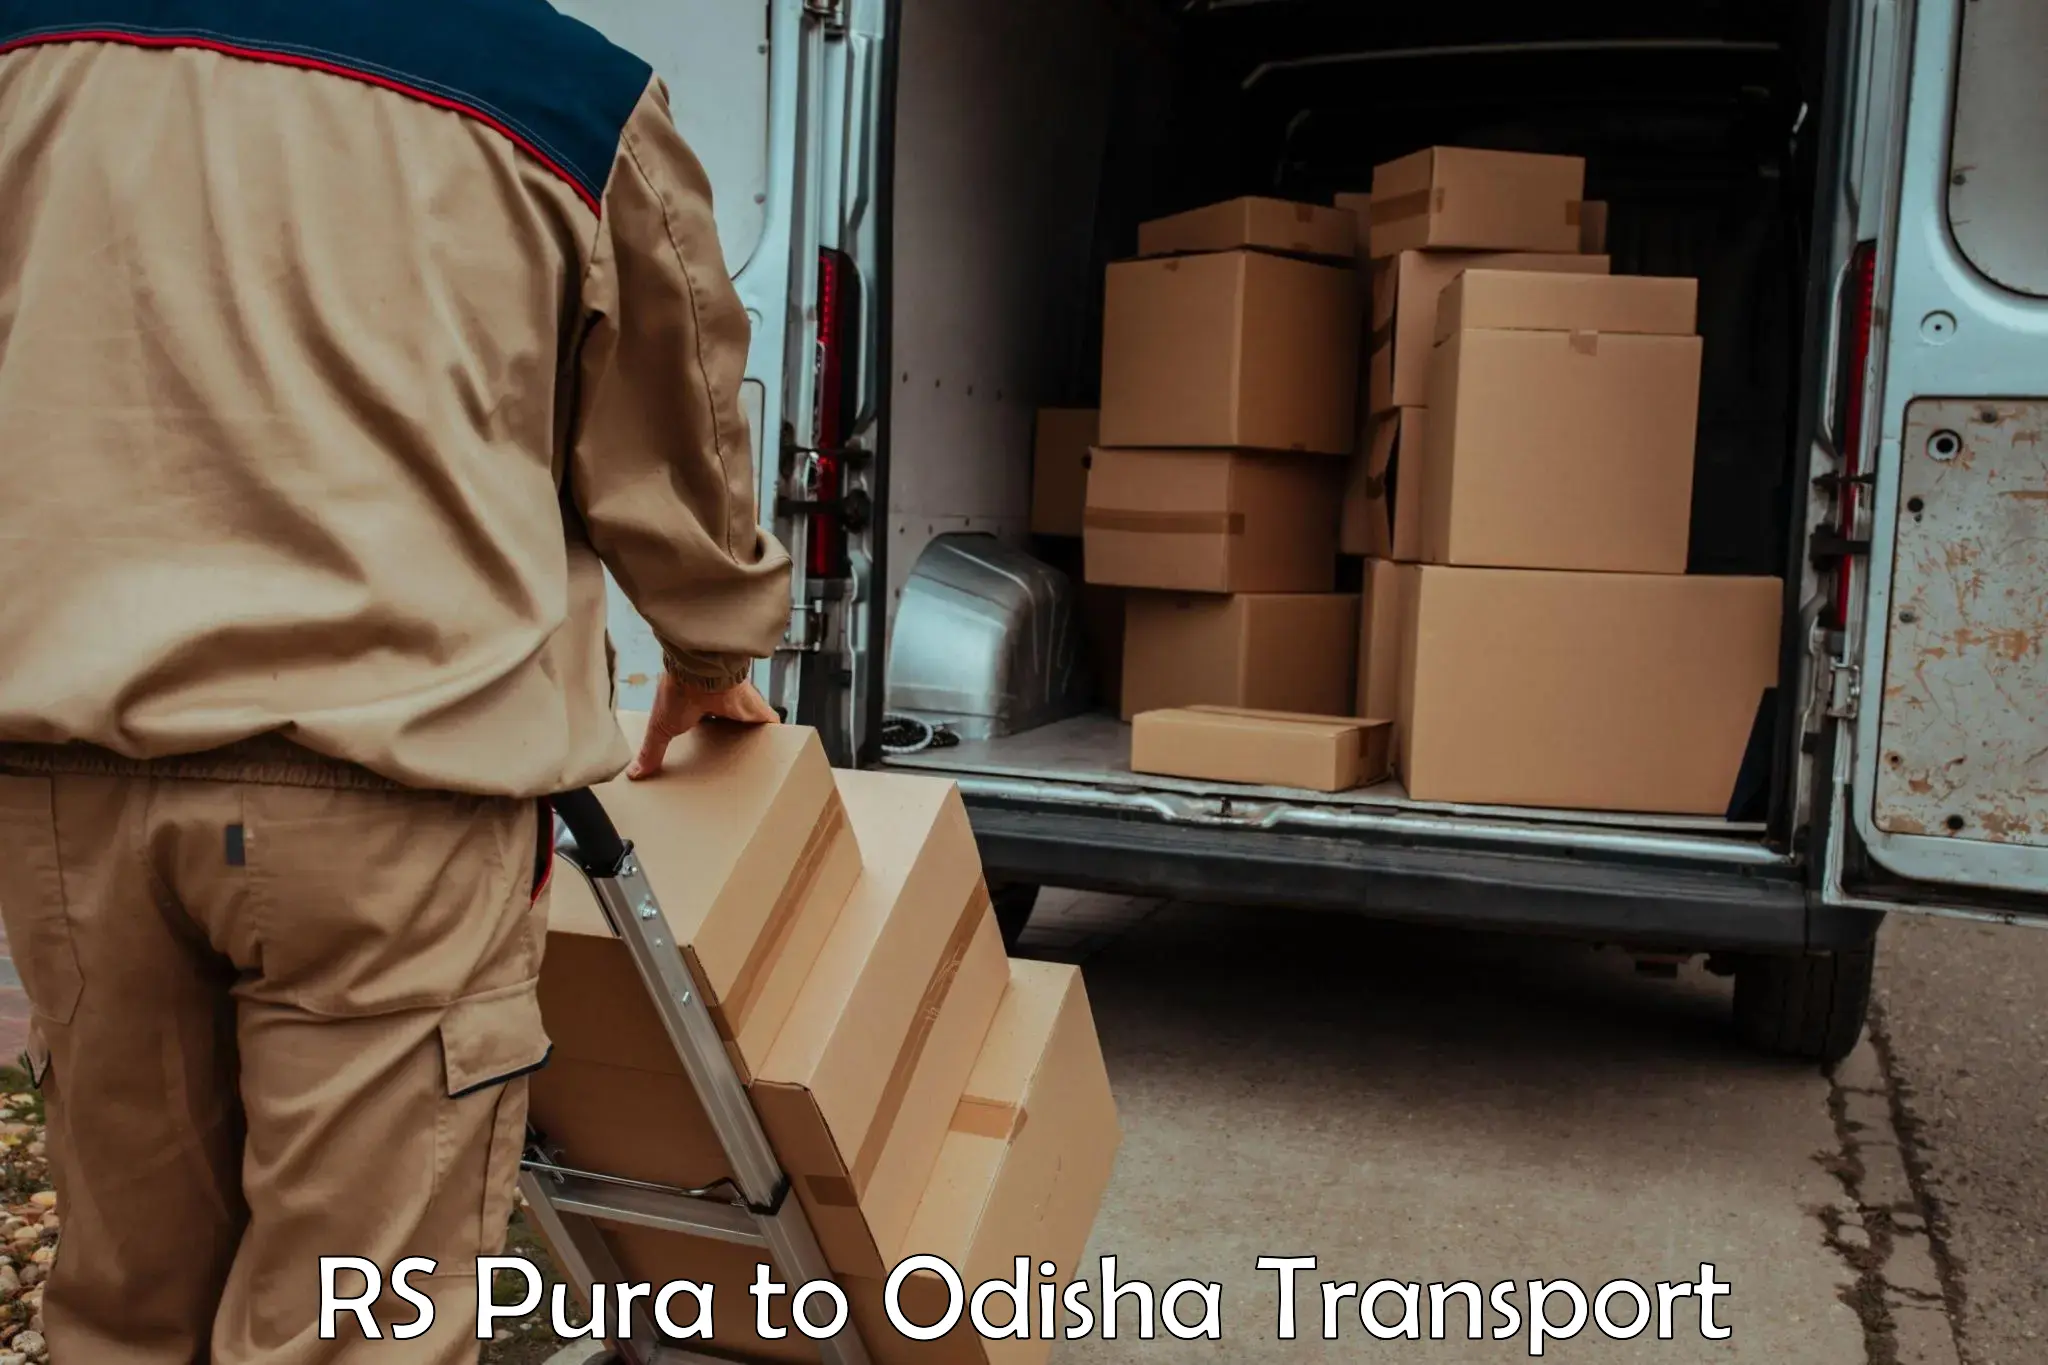 Daily parcel service transport RS Pura to Ghuntagadia